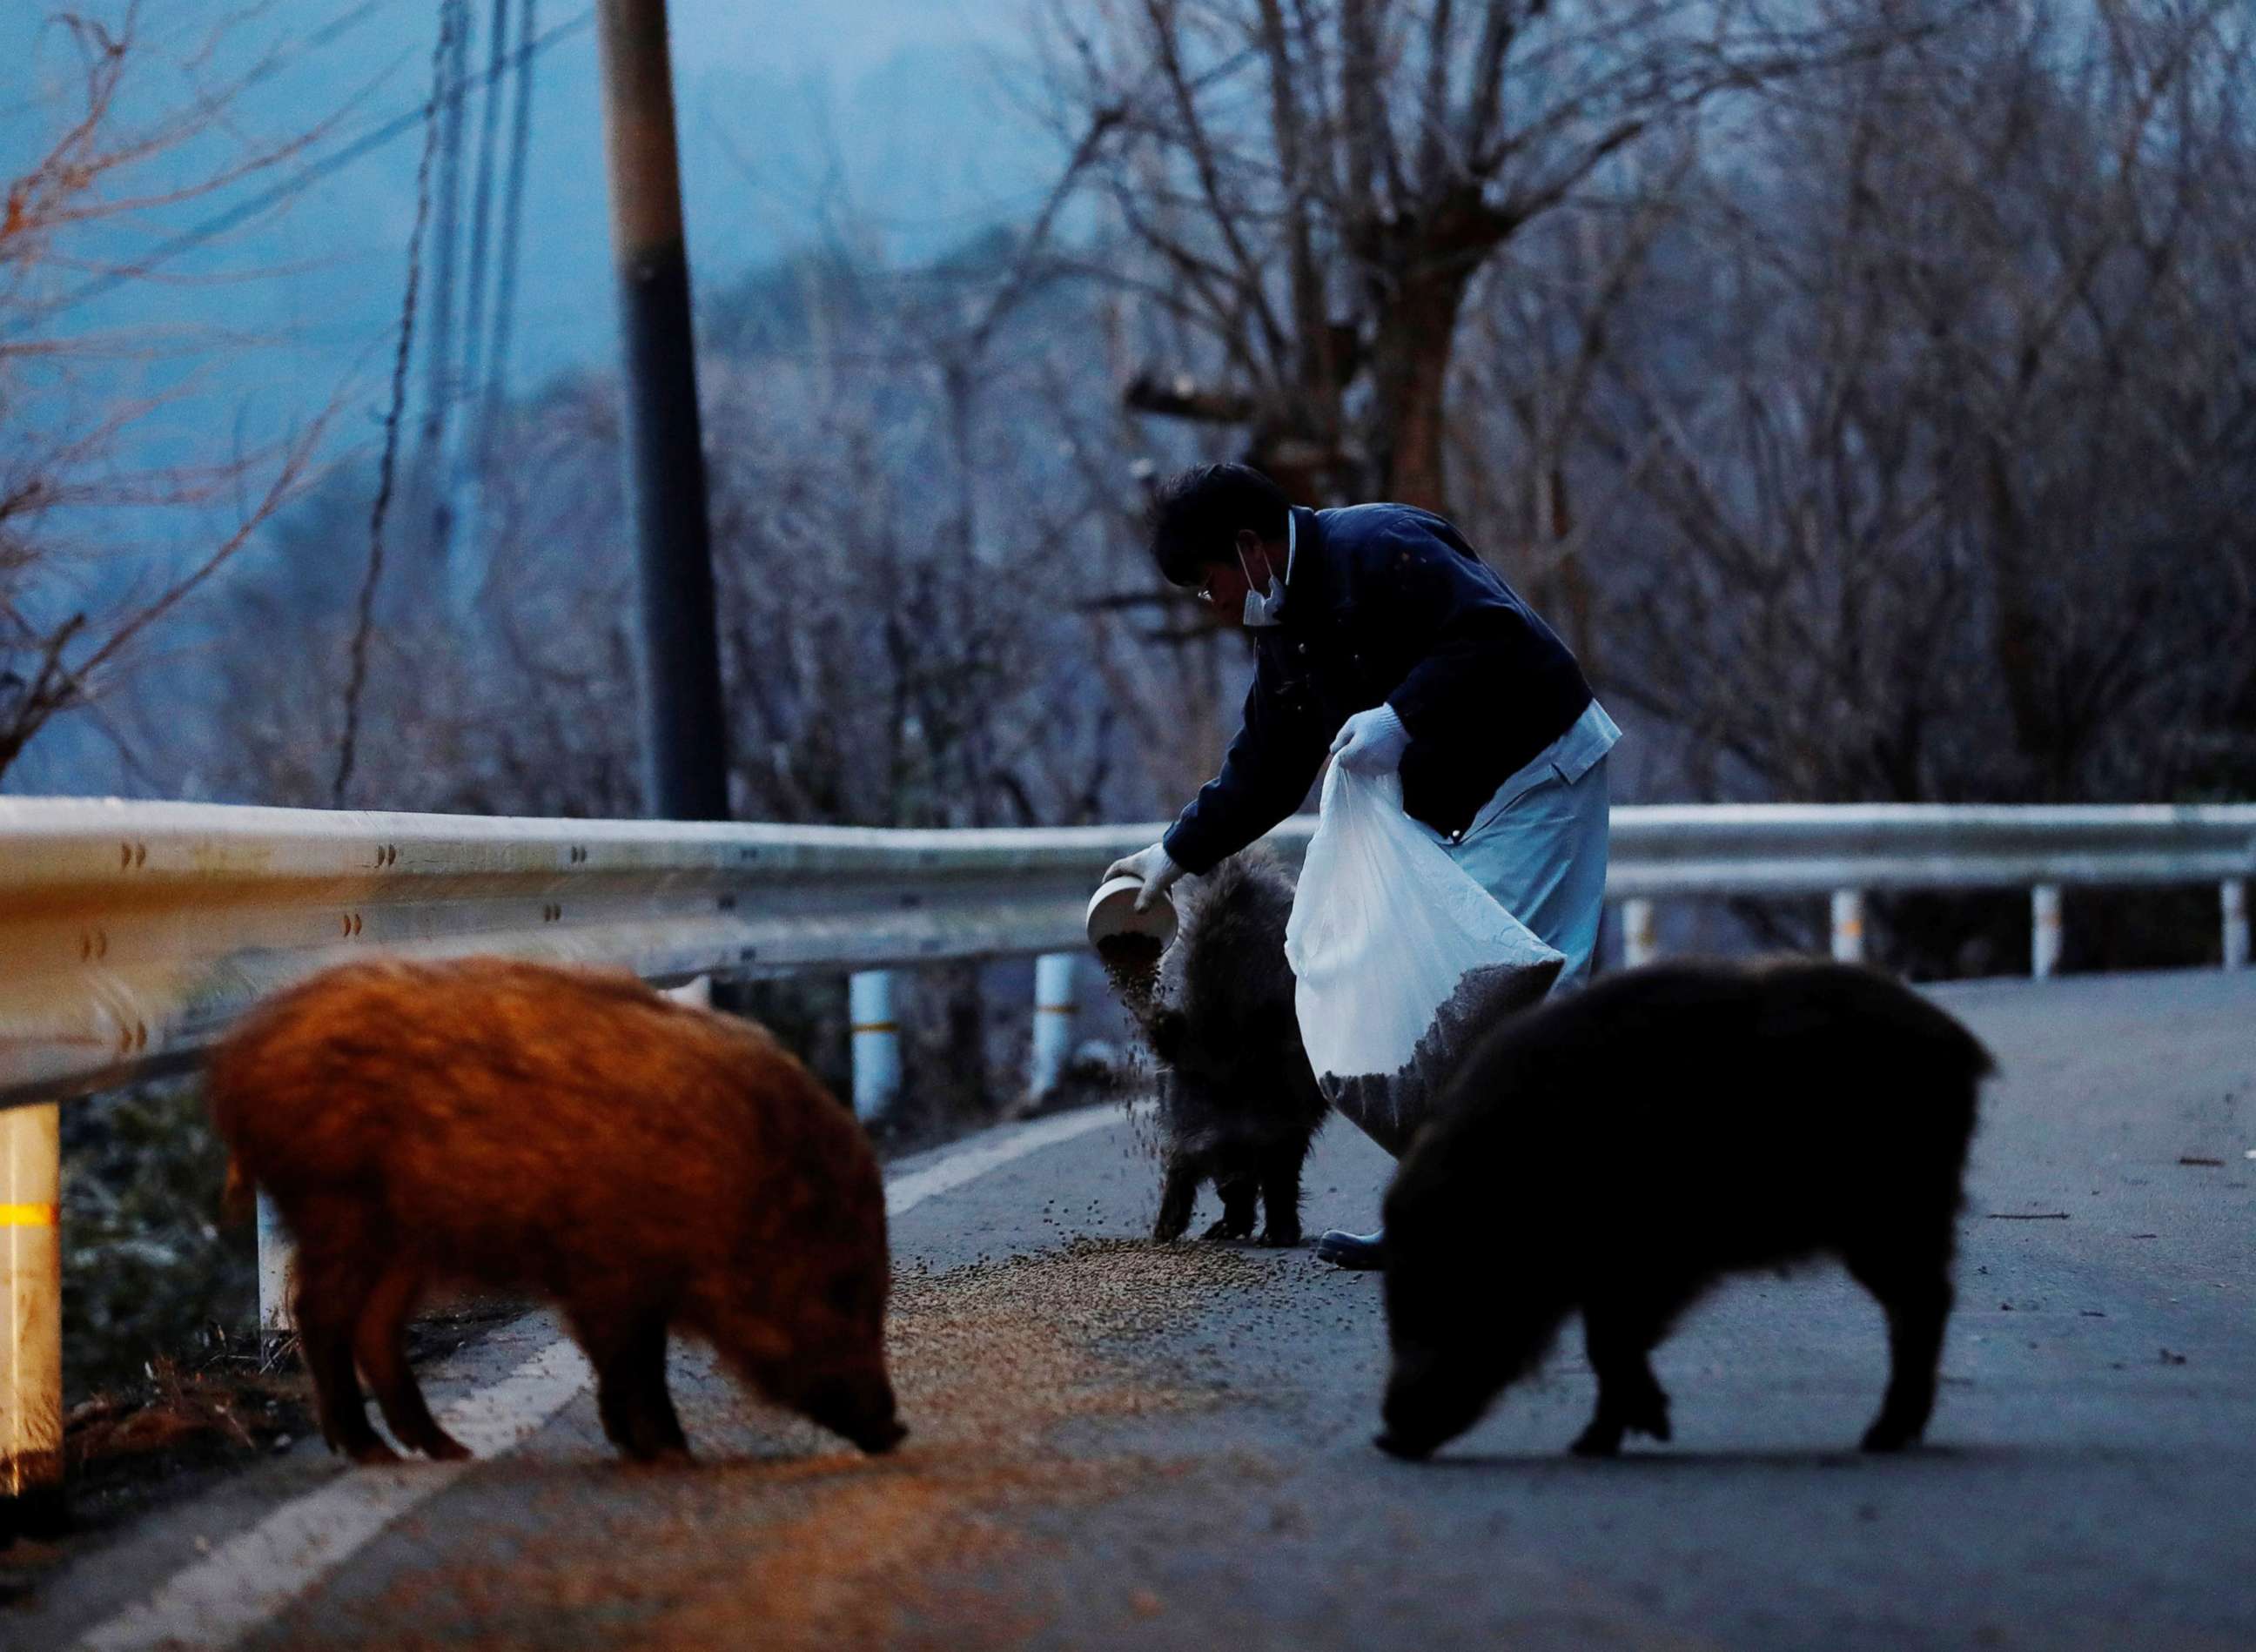 PHOTO: Sakae Kato feeds wild boars in front of his home, in a restricted zone in Namie, Fukushima Prefecture, Japan, Feb. 20, 2021.